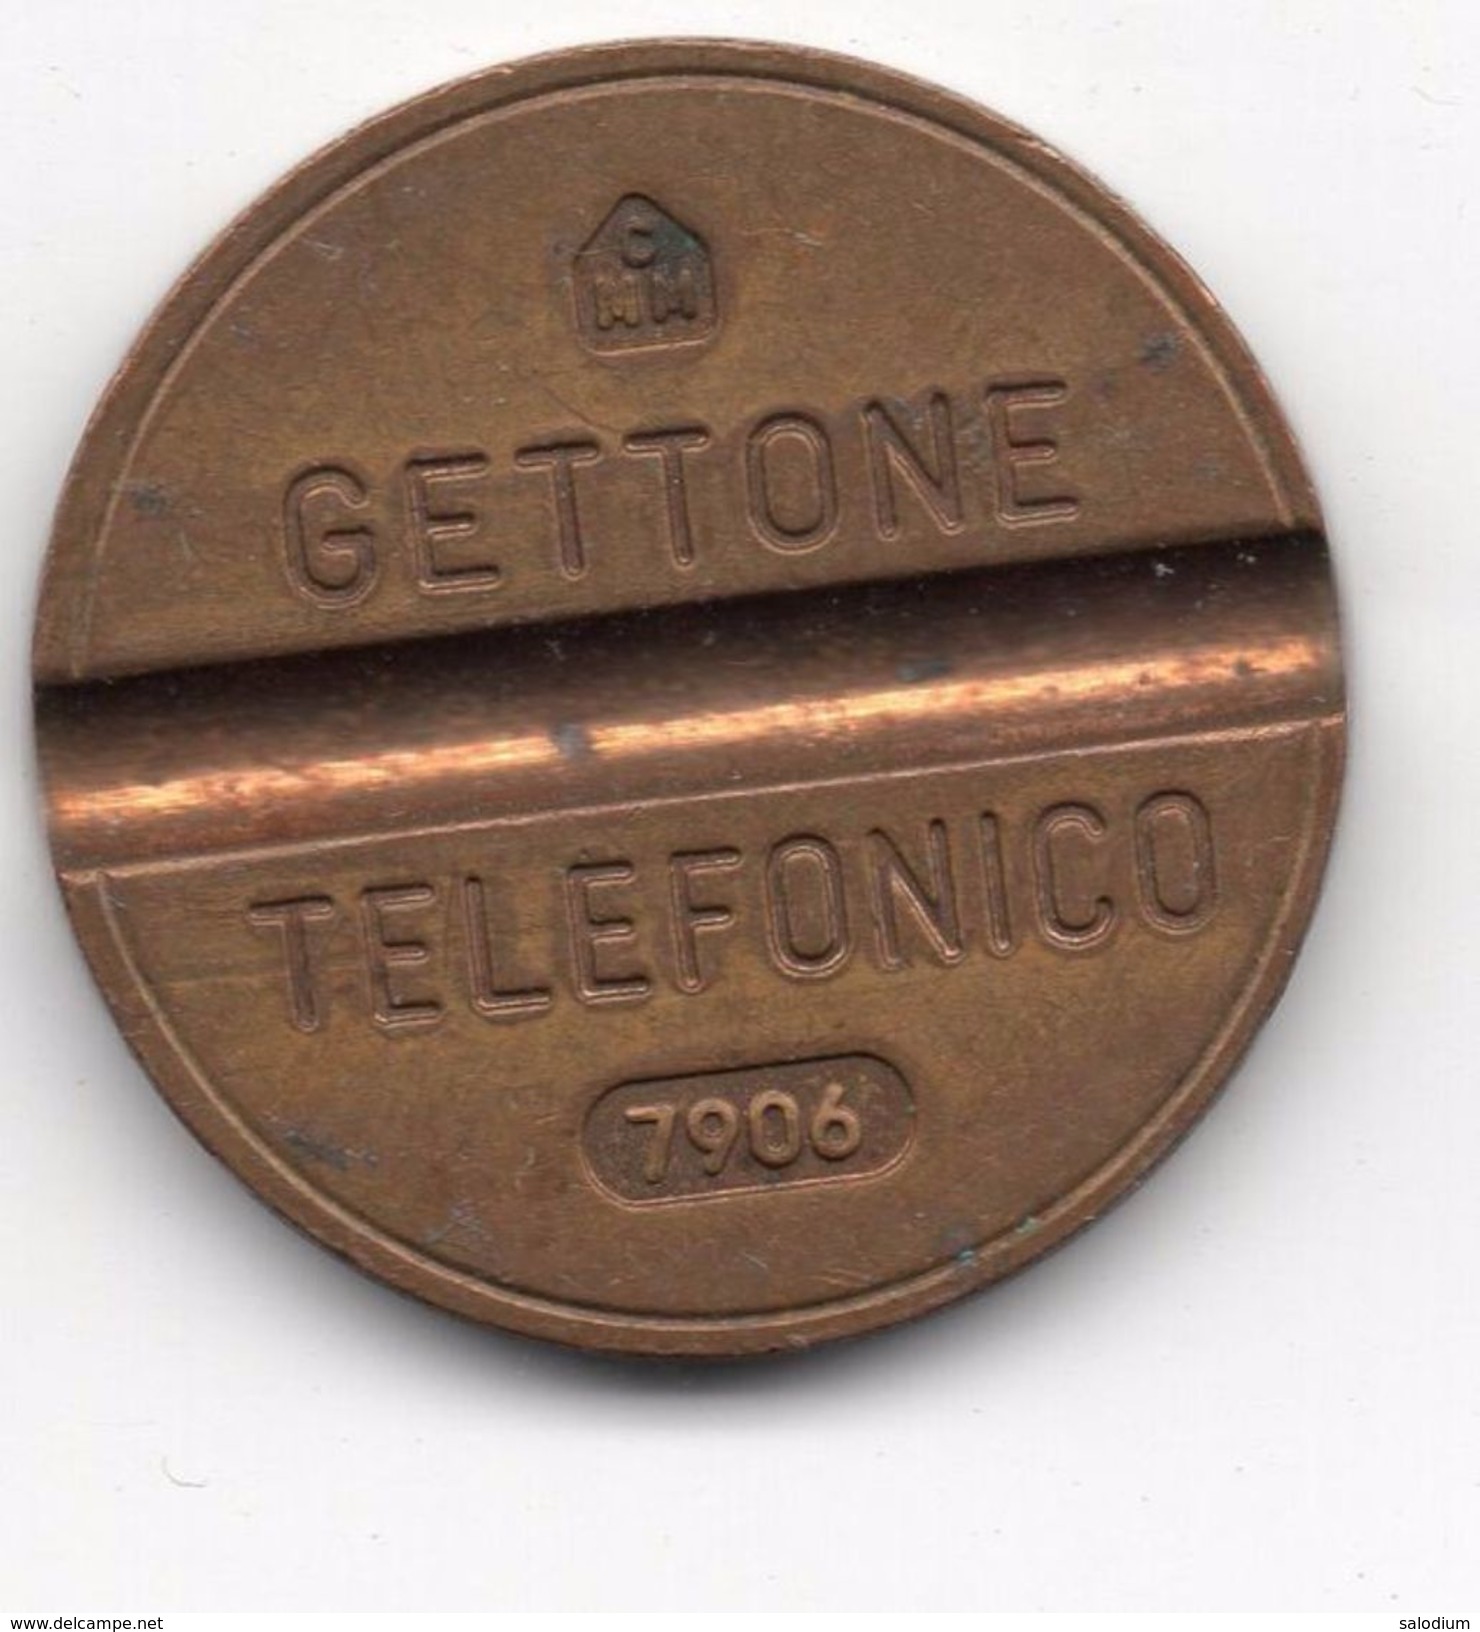 Gettone Telefonico 7906 Token Telephone - (Id-639) - Professionals/Firms